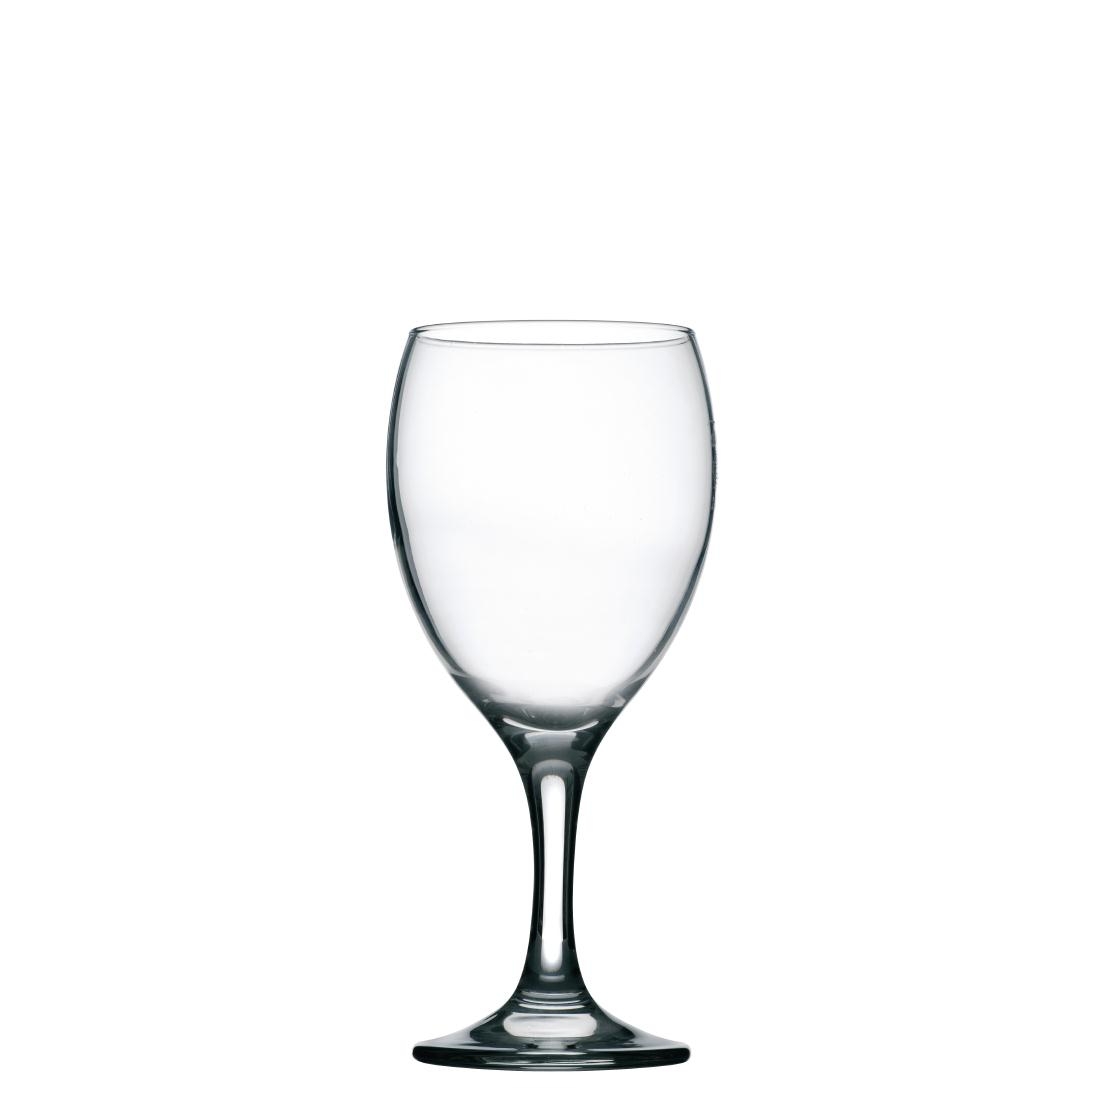 Utopia Imperial Wine Glasses 340ml CE Marked at 250ml